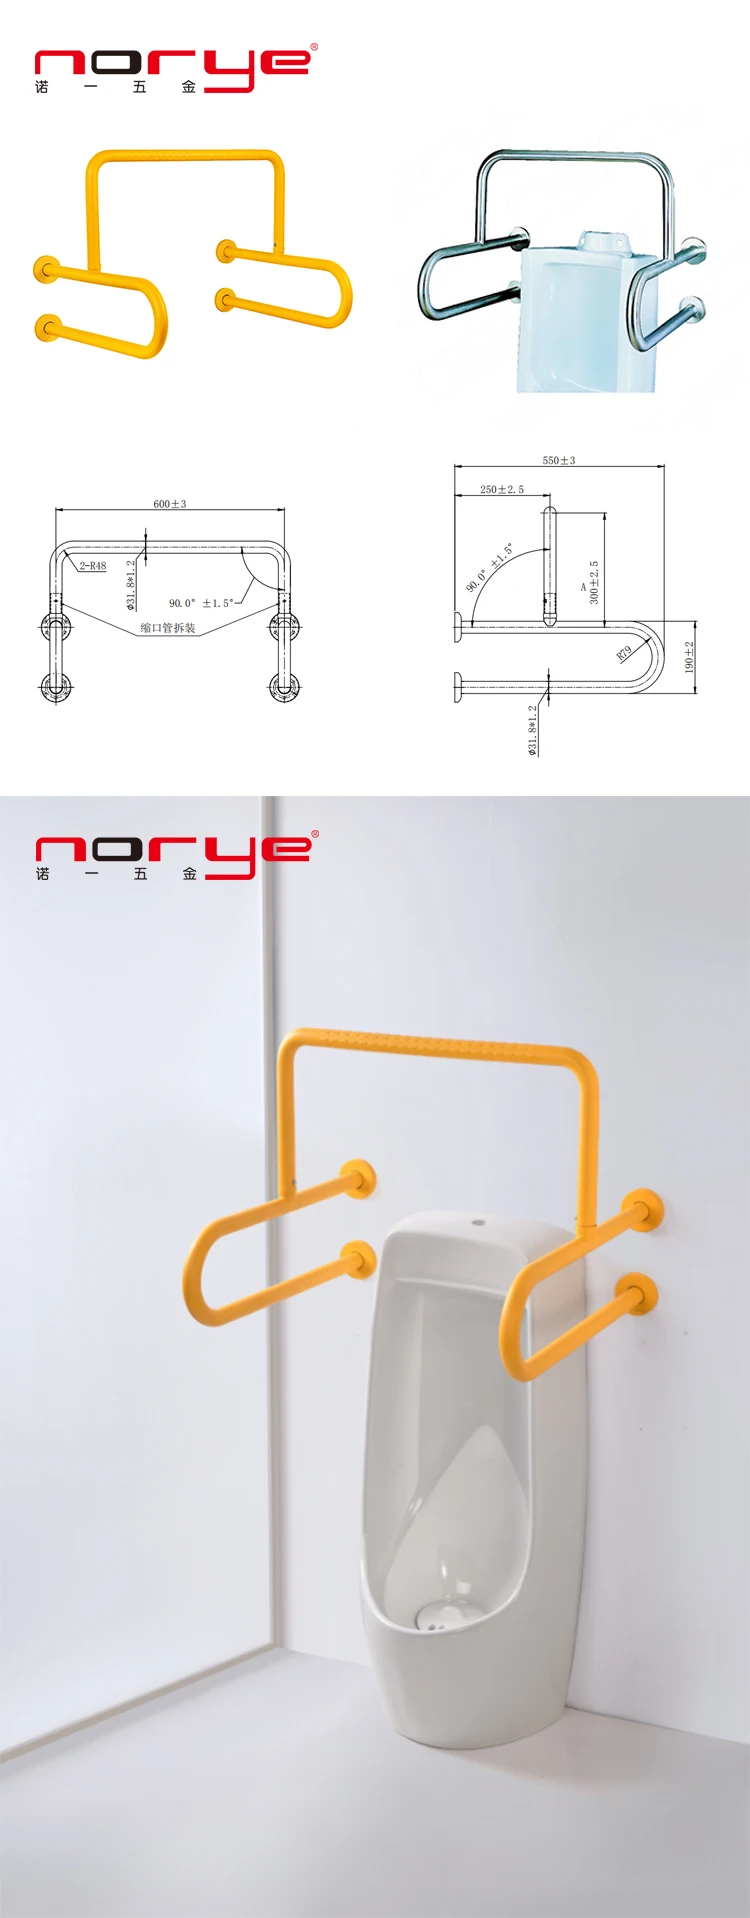 Norye professional steel toilets grab rails for disabled